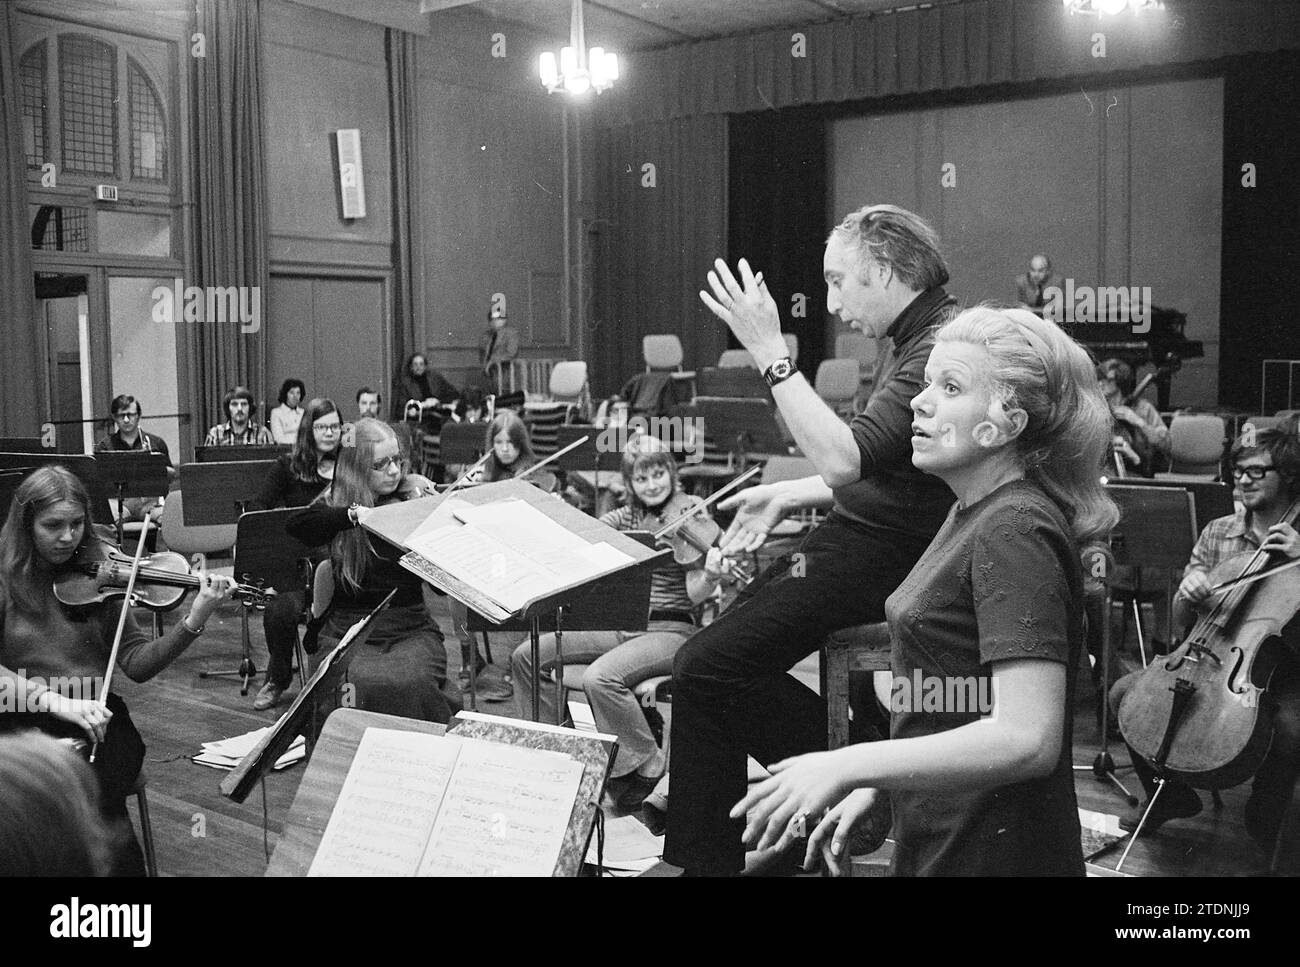 The Turkish soprano Suna Korat rehearses with the Haarlem Youth Orchestra, conducted by André Kaart., Music, Haarlem, The Netherlands, 30-09-1972, Whizgle News from the Past, Tailored for the Future. Explore historical narratives, Dutch The Netherlands agency image with a modern perspective, bridging the gap between yesterday's events and tomorrow's insights. A timeless journey shaping the stories that shape our future Stock Photo